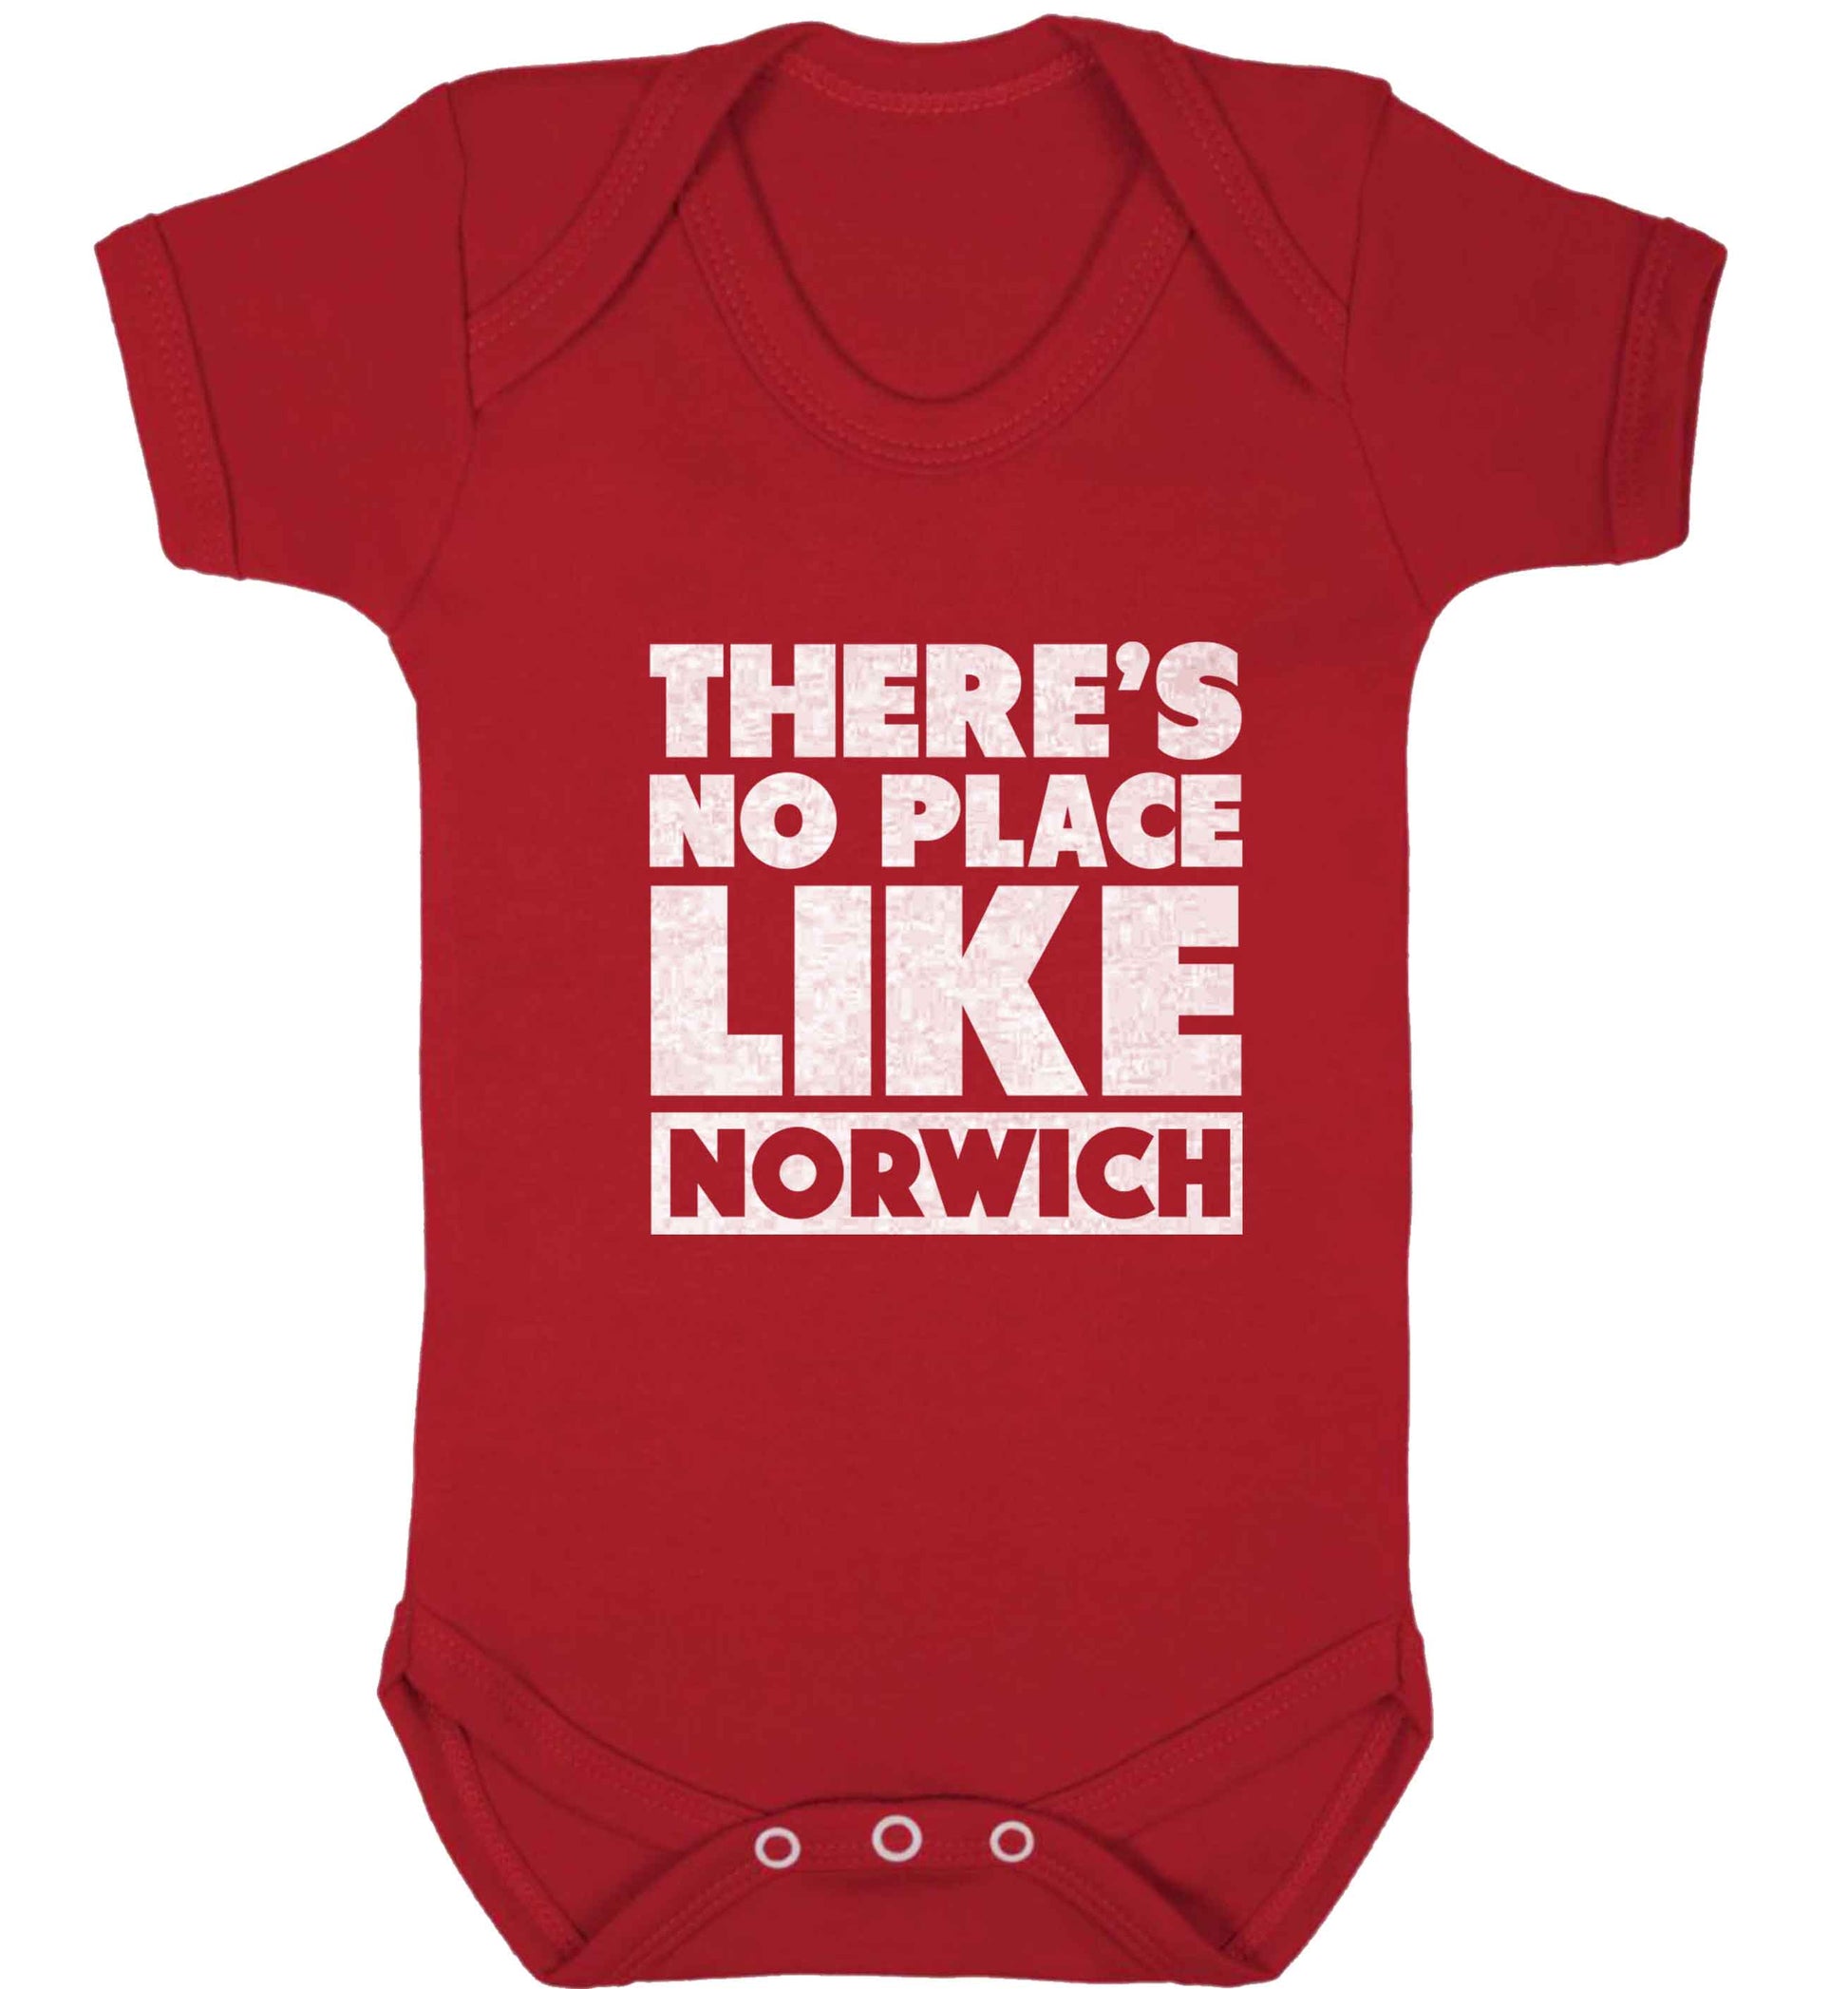 There's no place like Norwich baby vest red 18-24 months